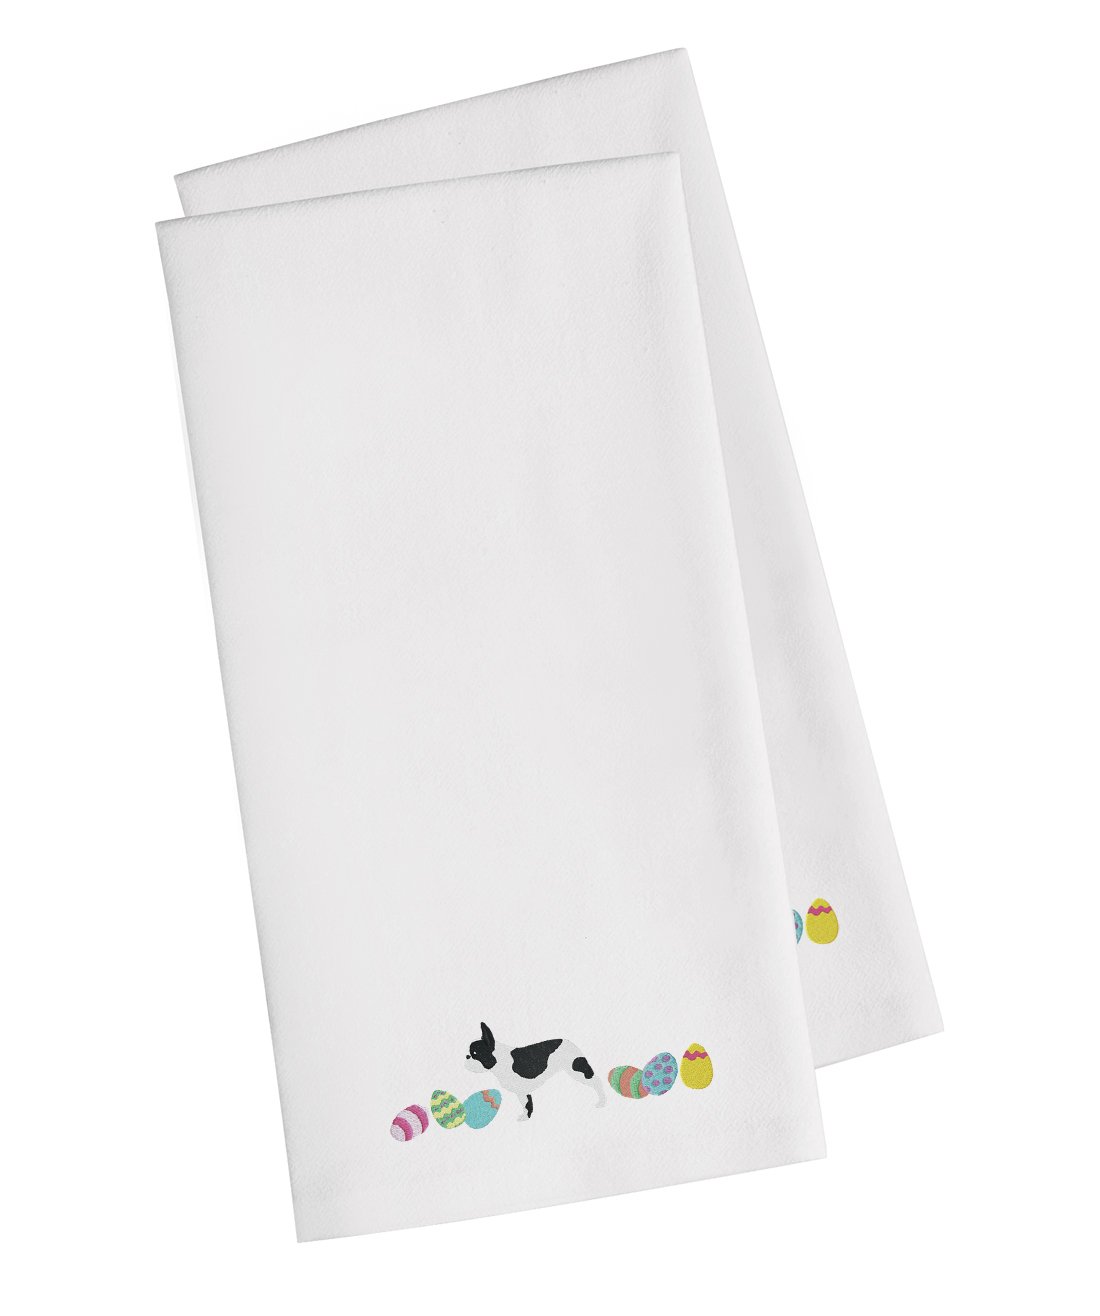 French Bulldog Easter White Embroidered Kitchen Towel Set of 2 CK1642WHTWE by Caroline's Treasures